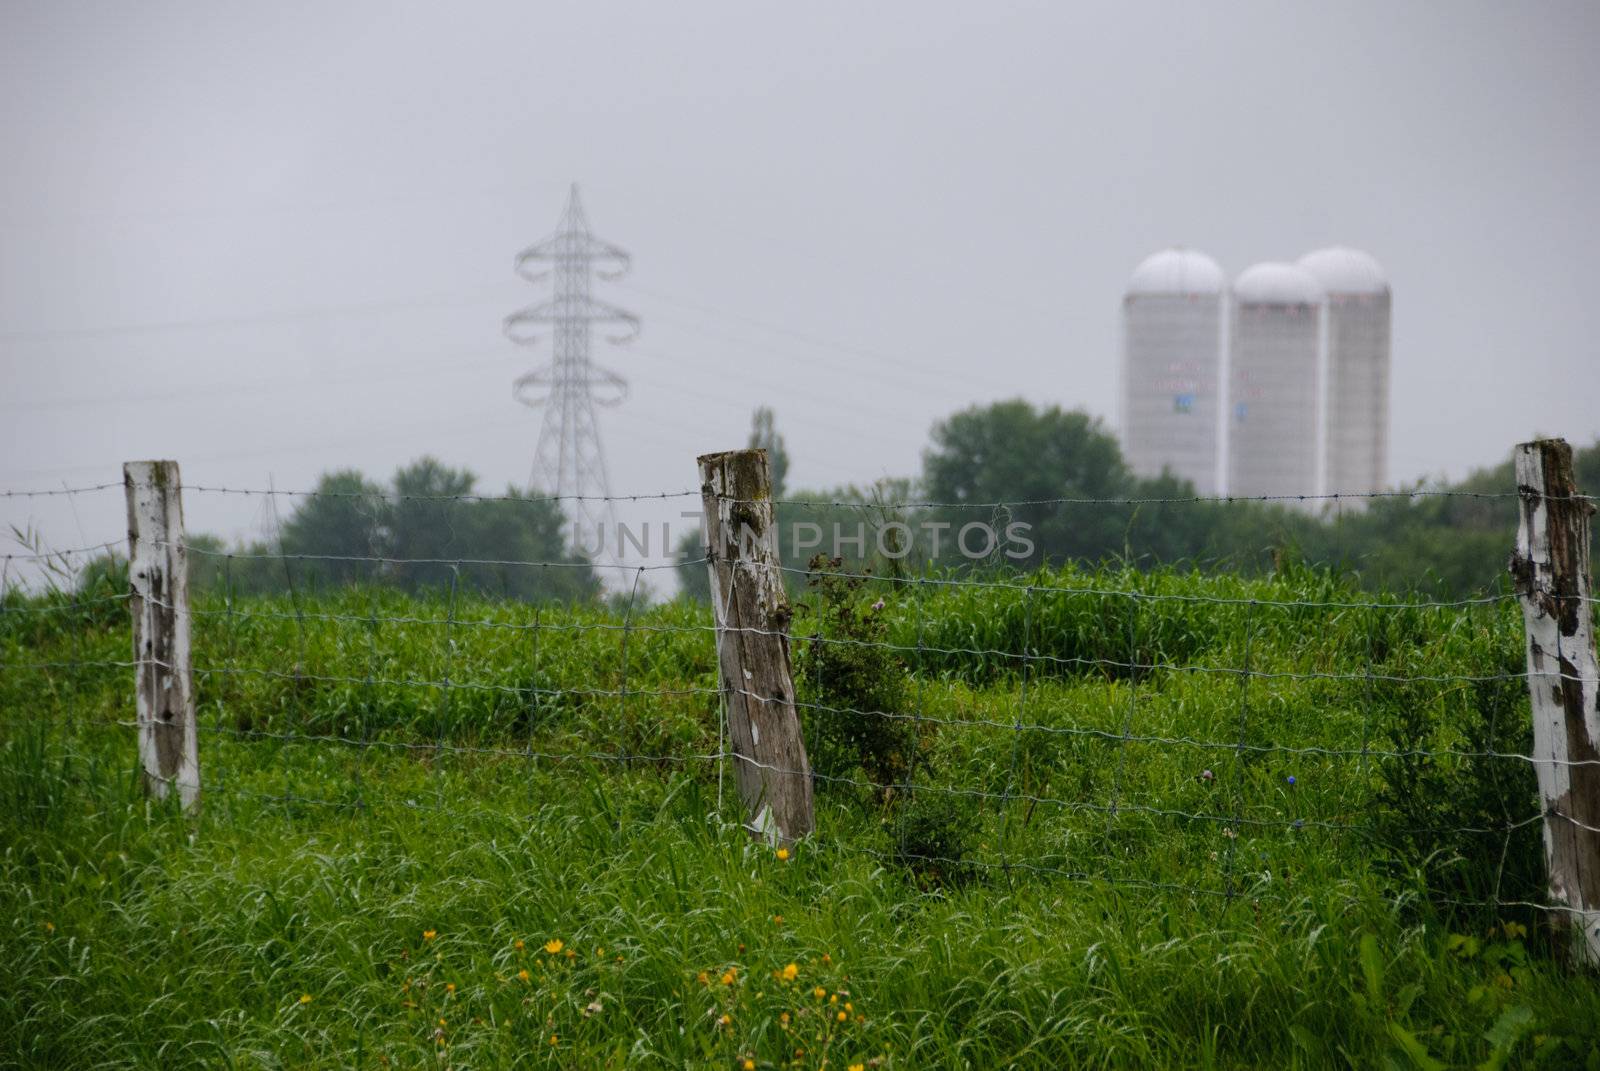 Picture of a contry side fence with power lines in the background